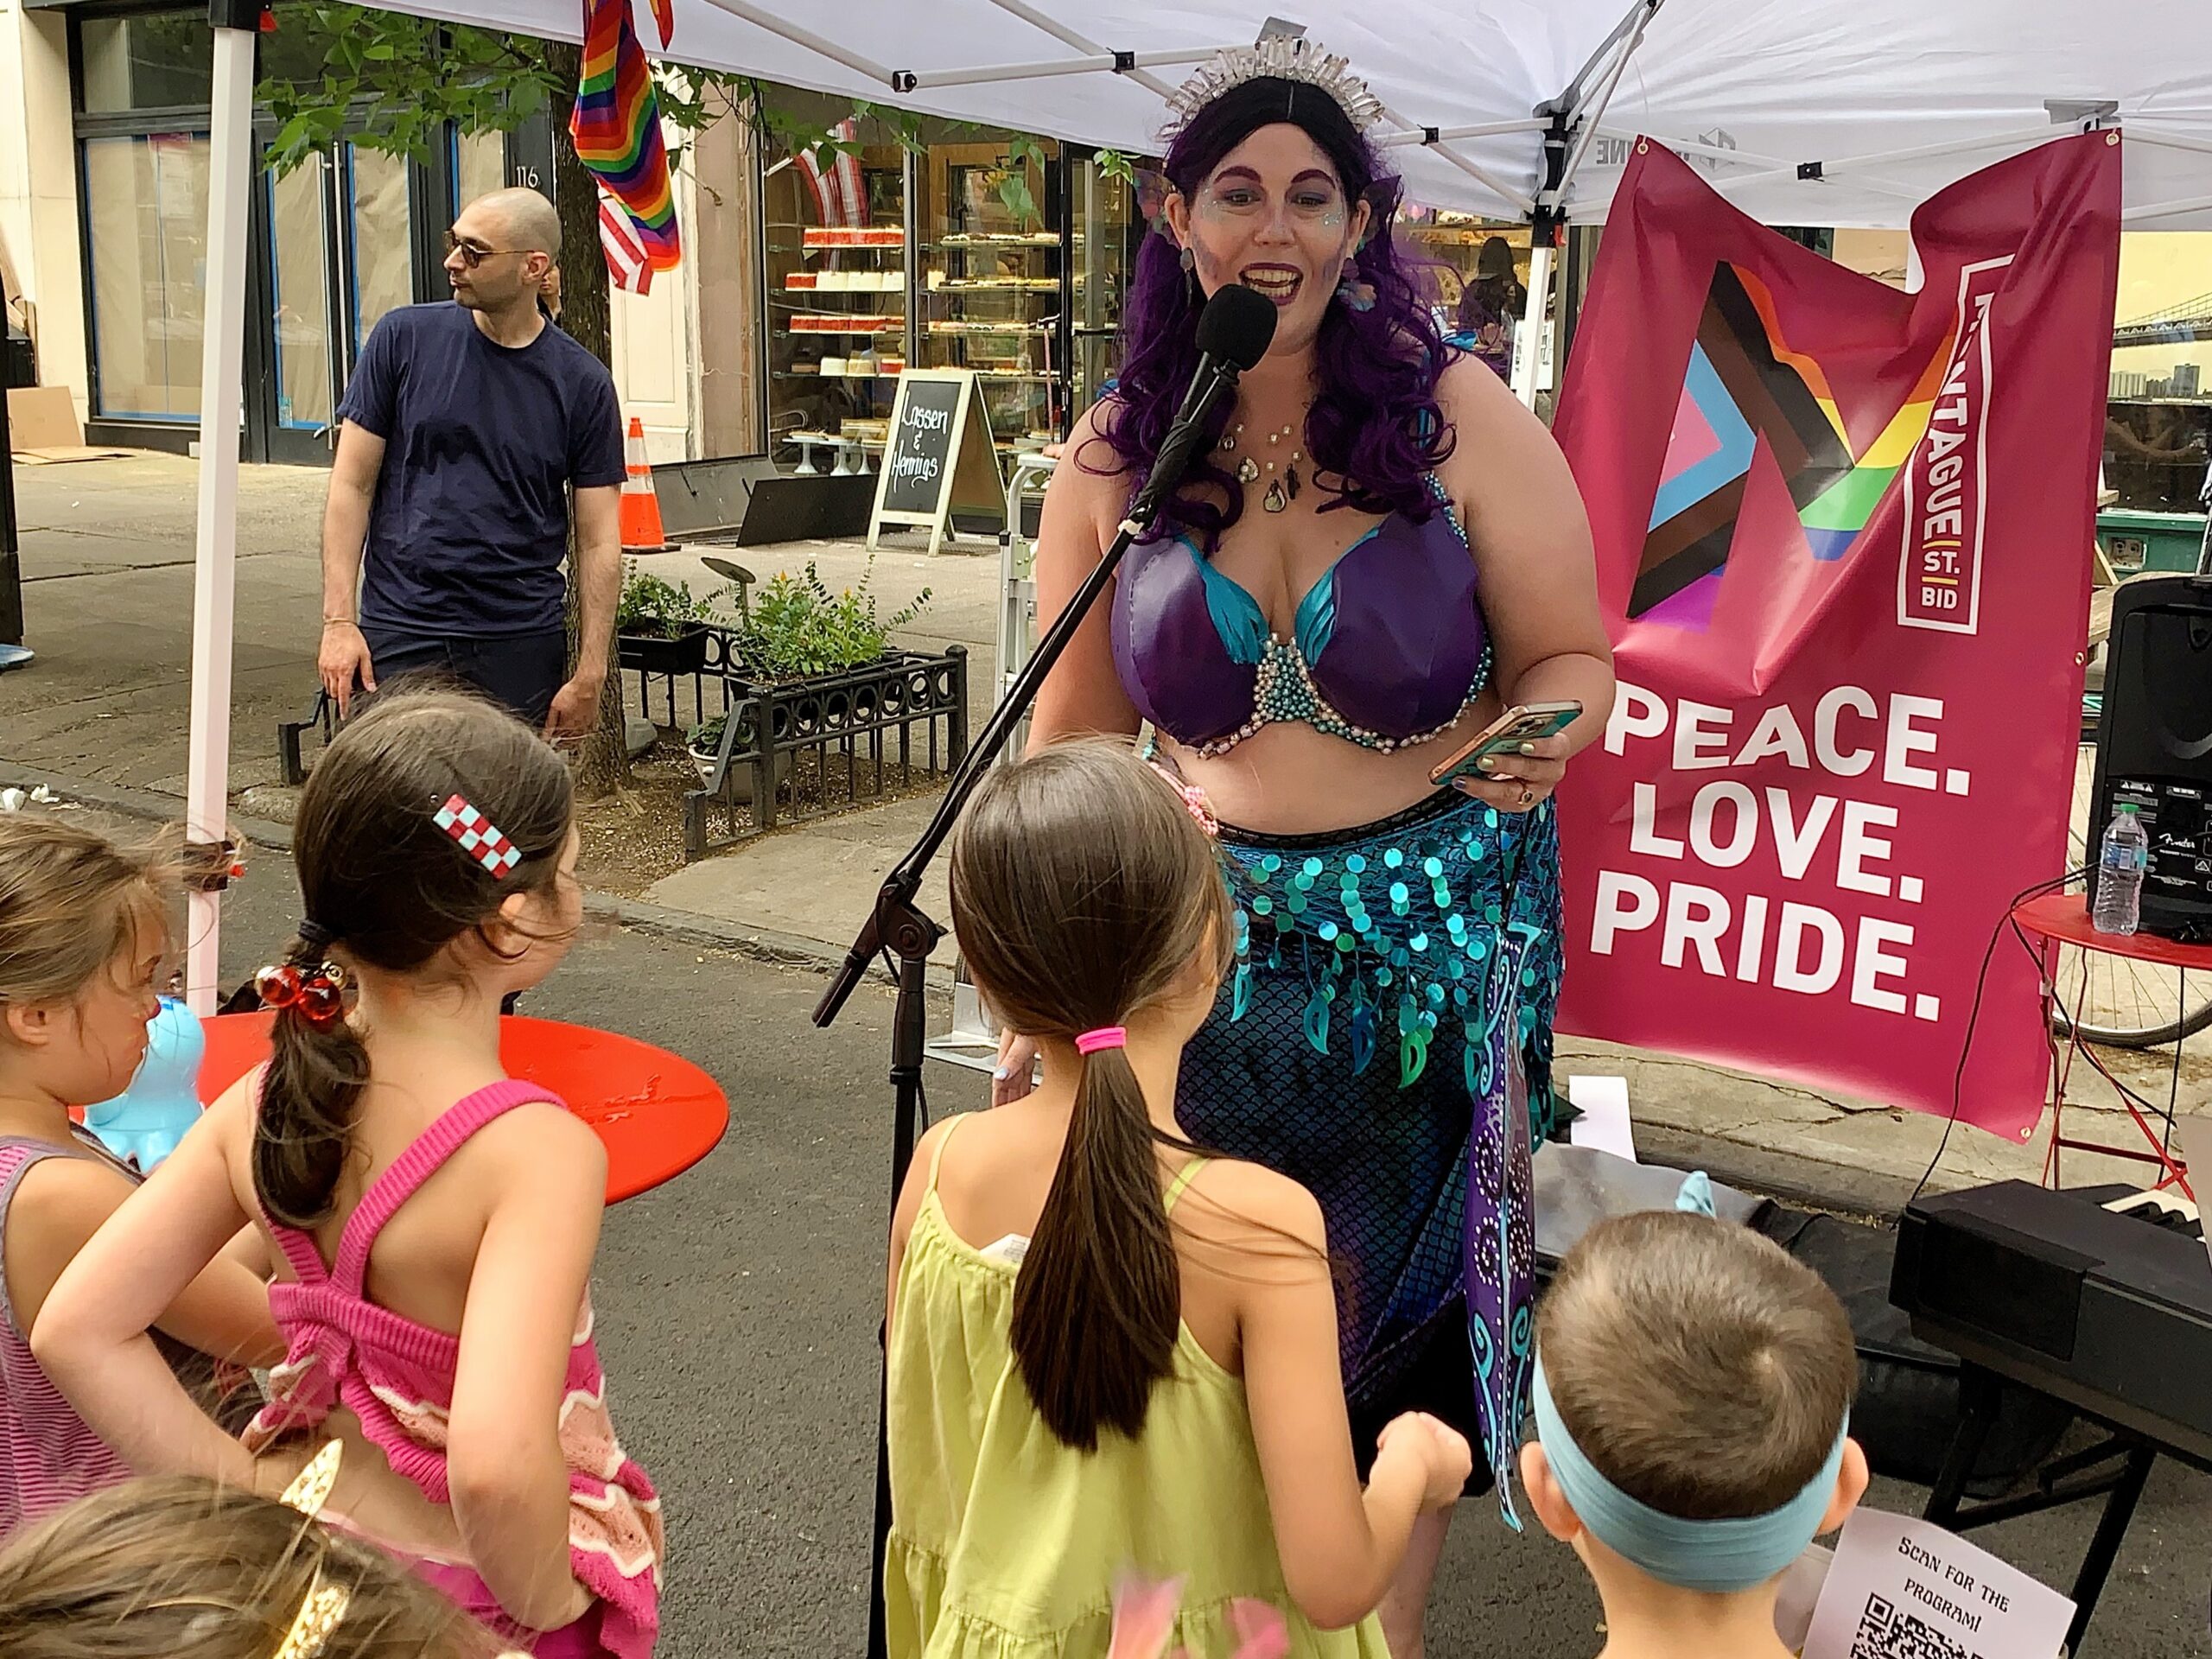 Buoy, Brooklyn's opera-singing Mermaid, accompanied by Capt. Emma on the piano (not shown), captivated youngsters on Montague Street on Sunday during the Montague BID’s Pride celebration.